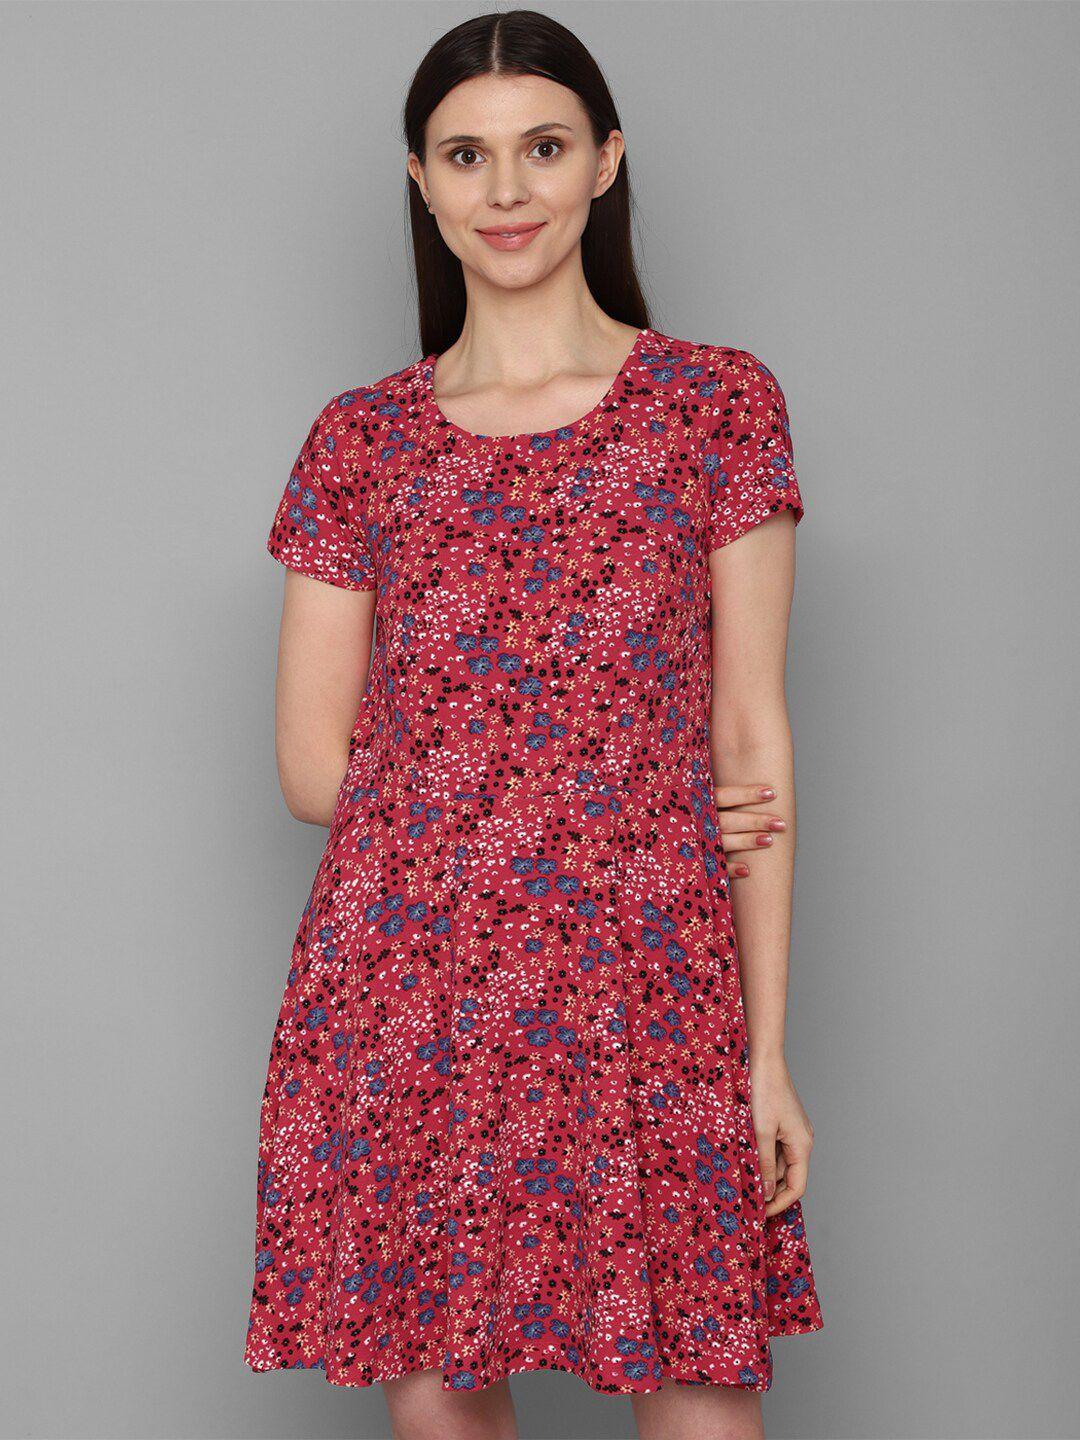 Allen Solly Woman Pink Floral A-Line Dress